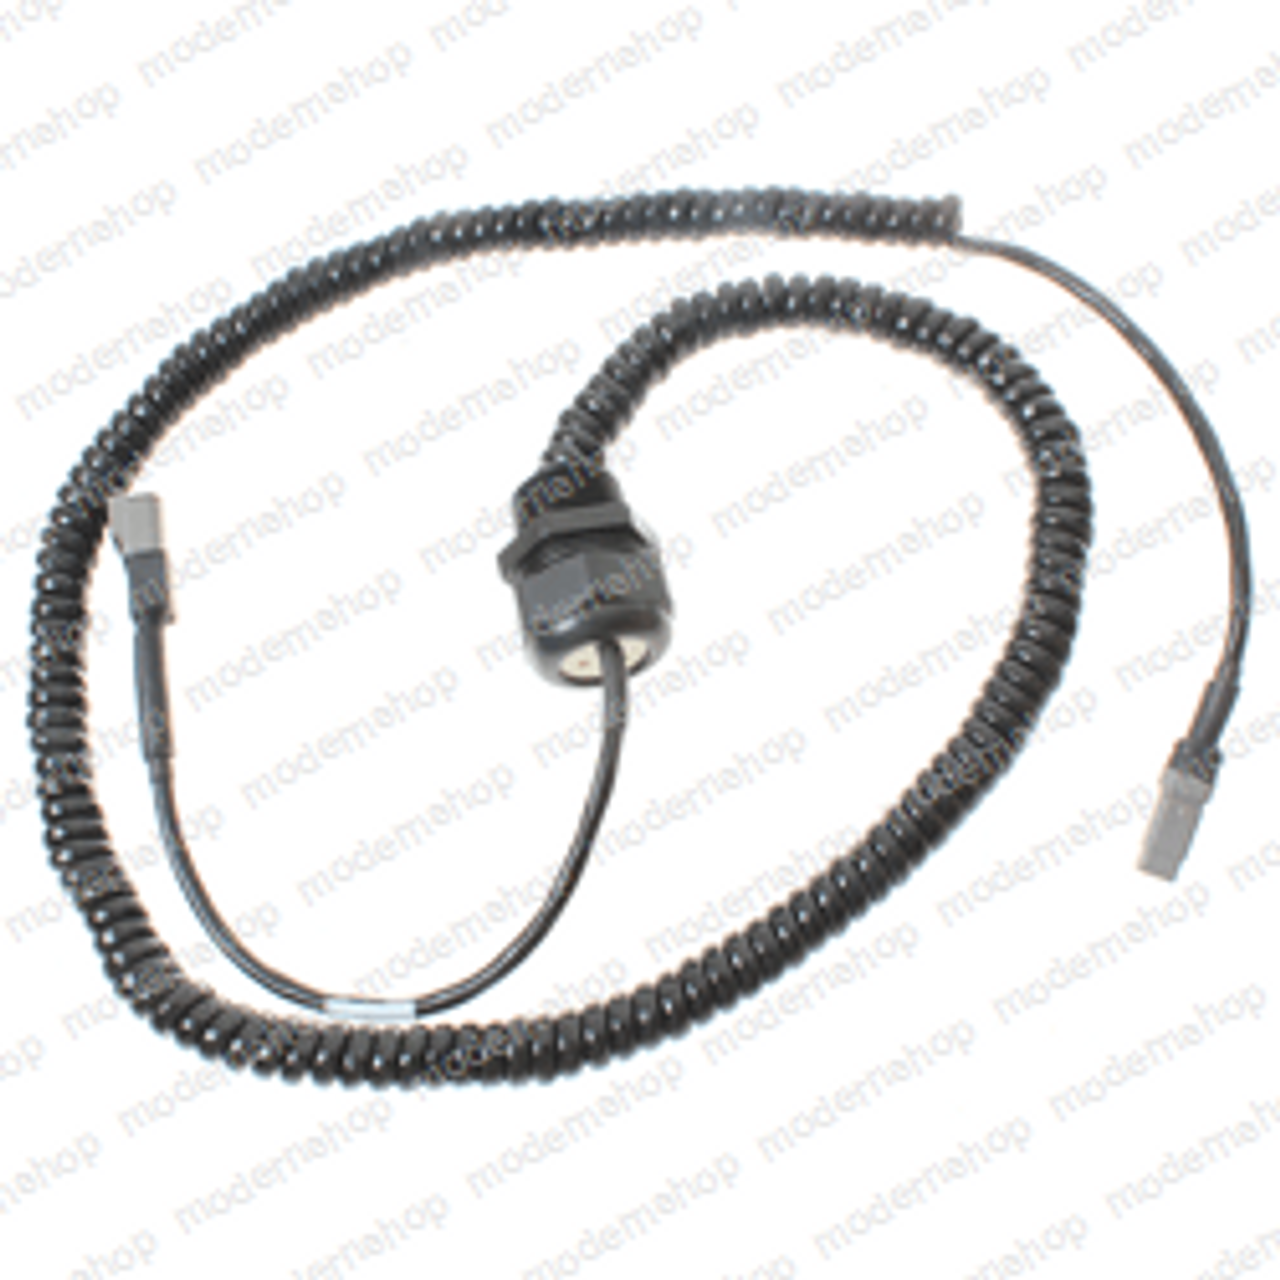 6844357: Cascade CABLE ASSEMBLY - 2 X 41.5 IN  (